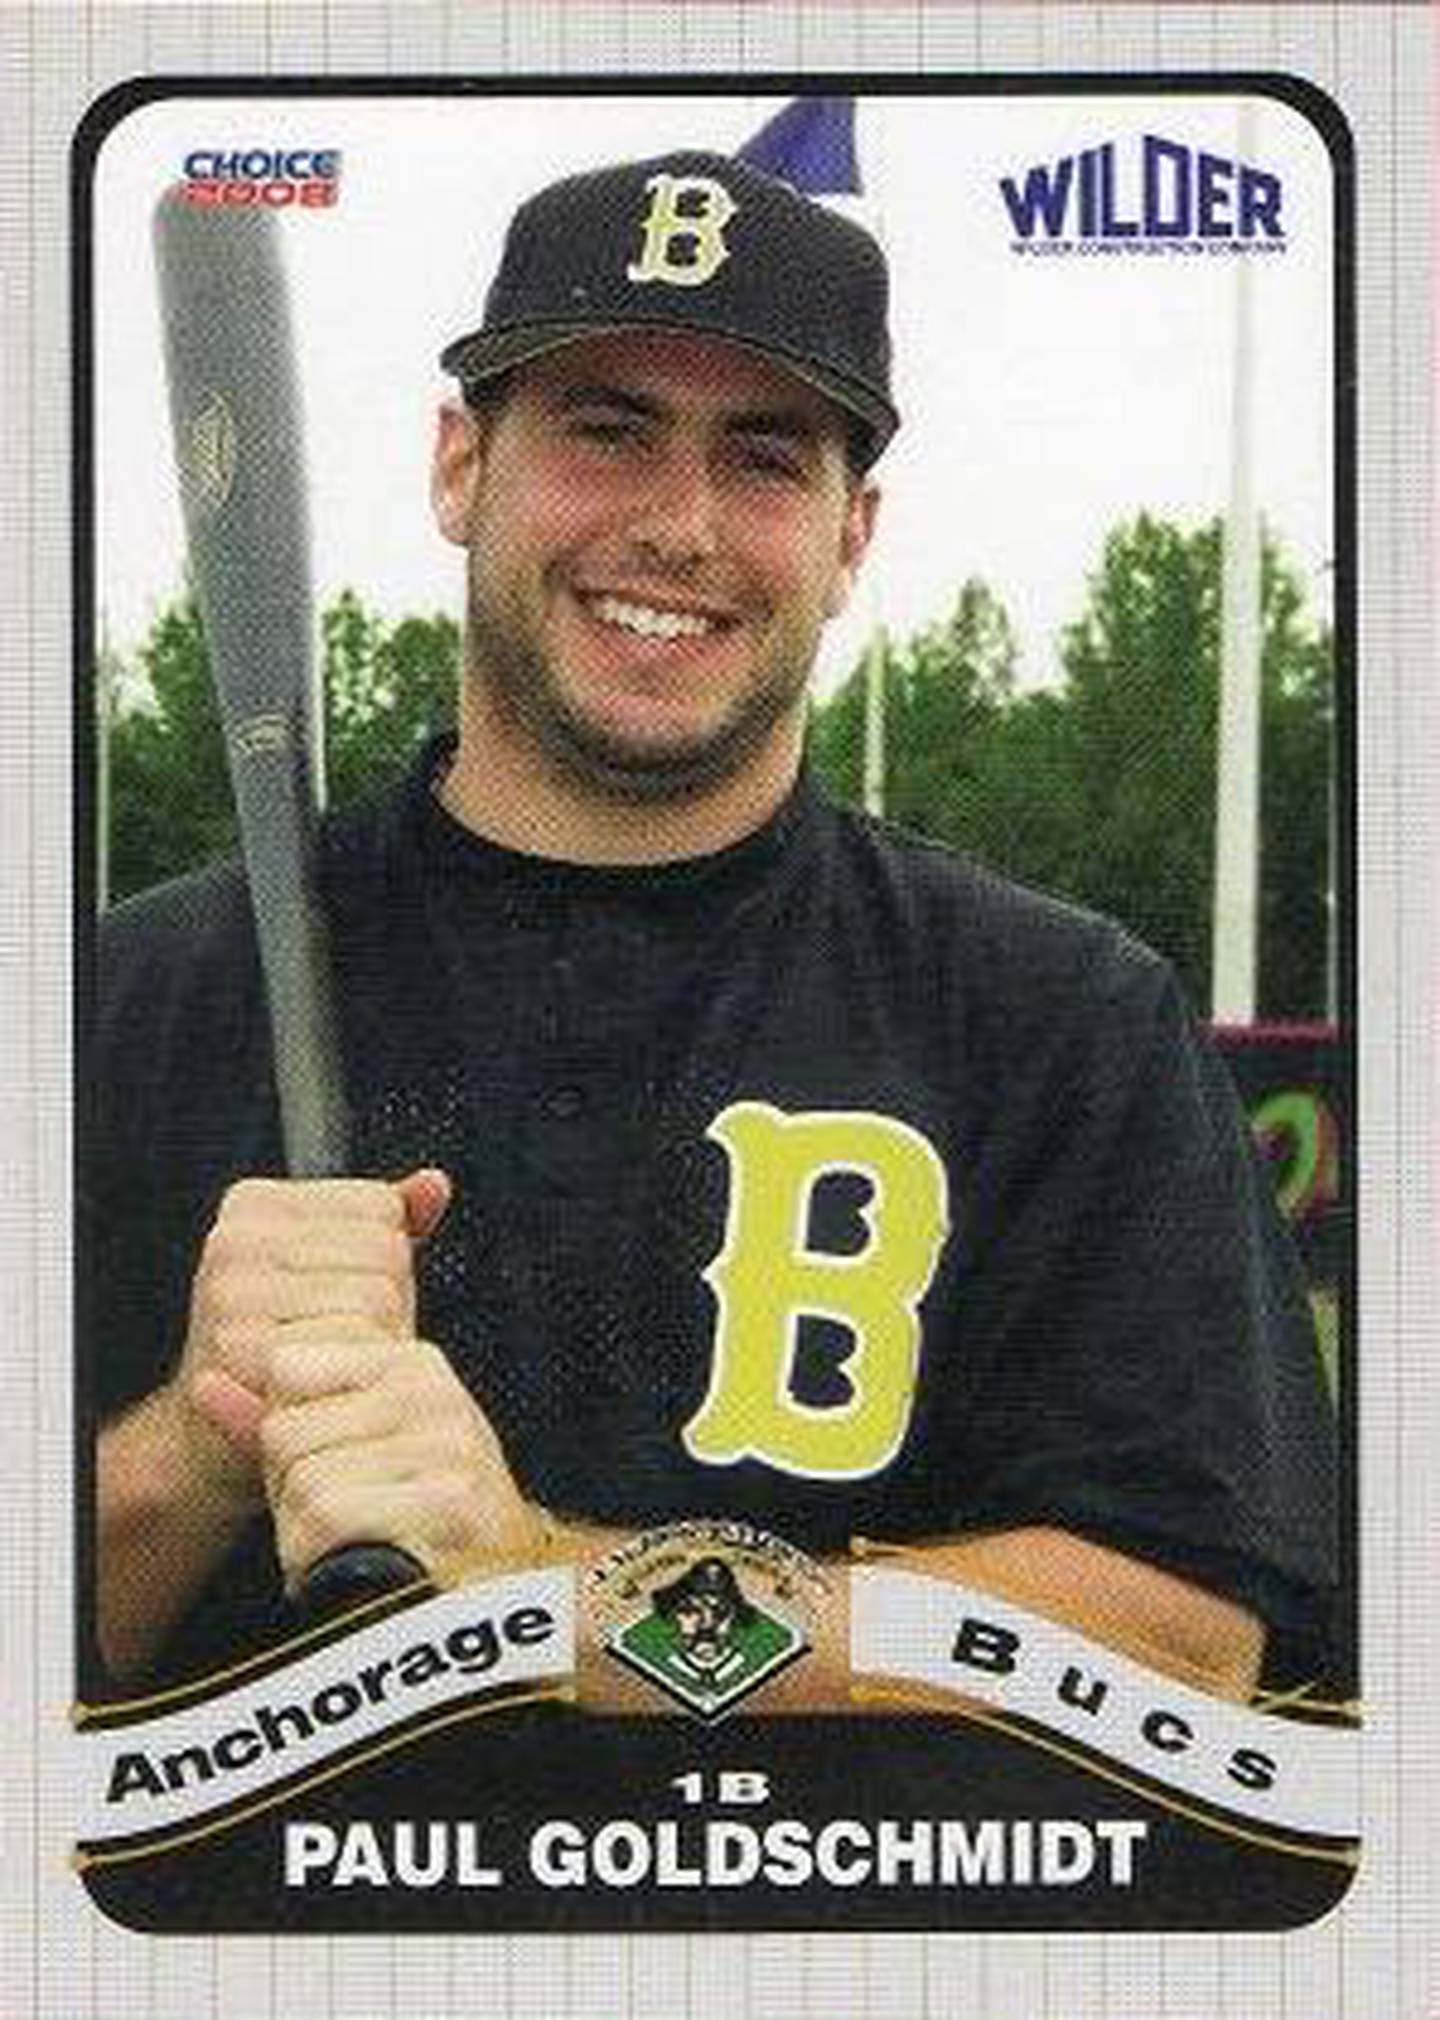 Paul Goldschmidt baseball card with the 2008 Anchorage Bucs